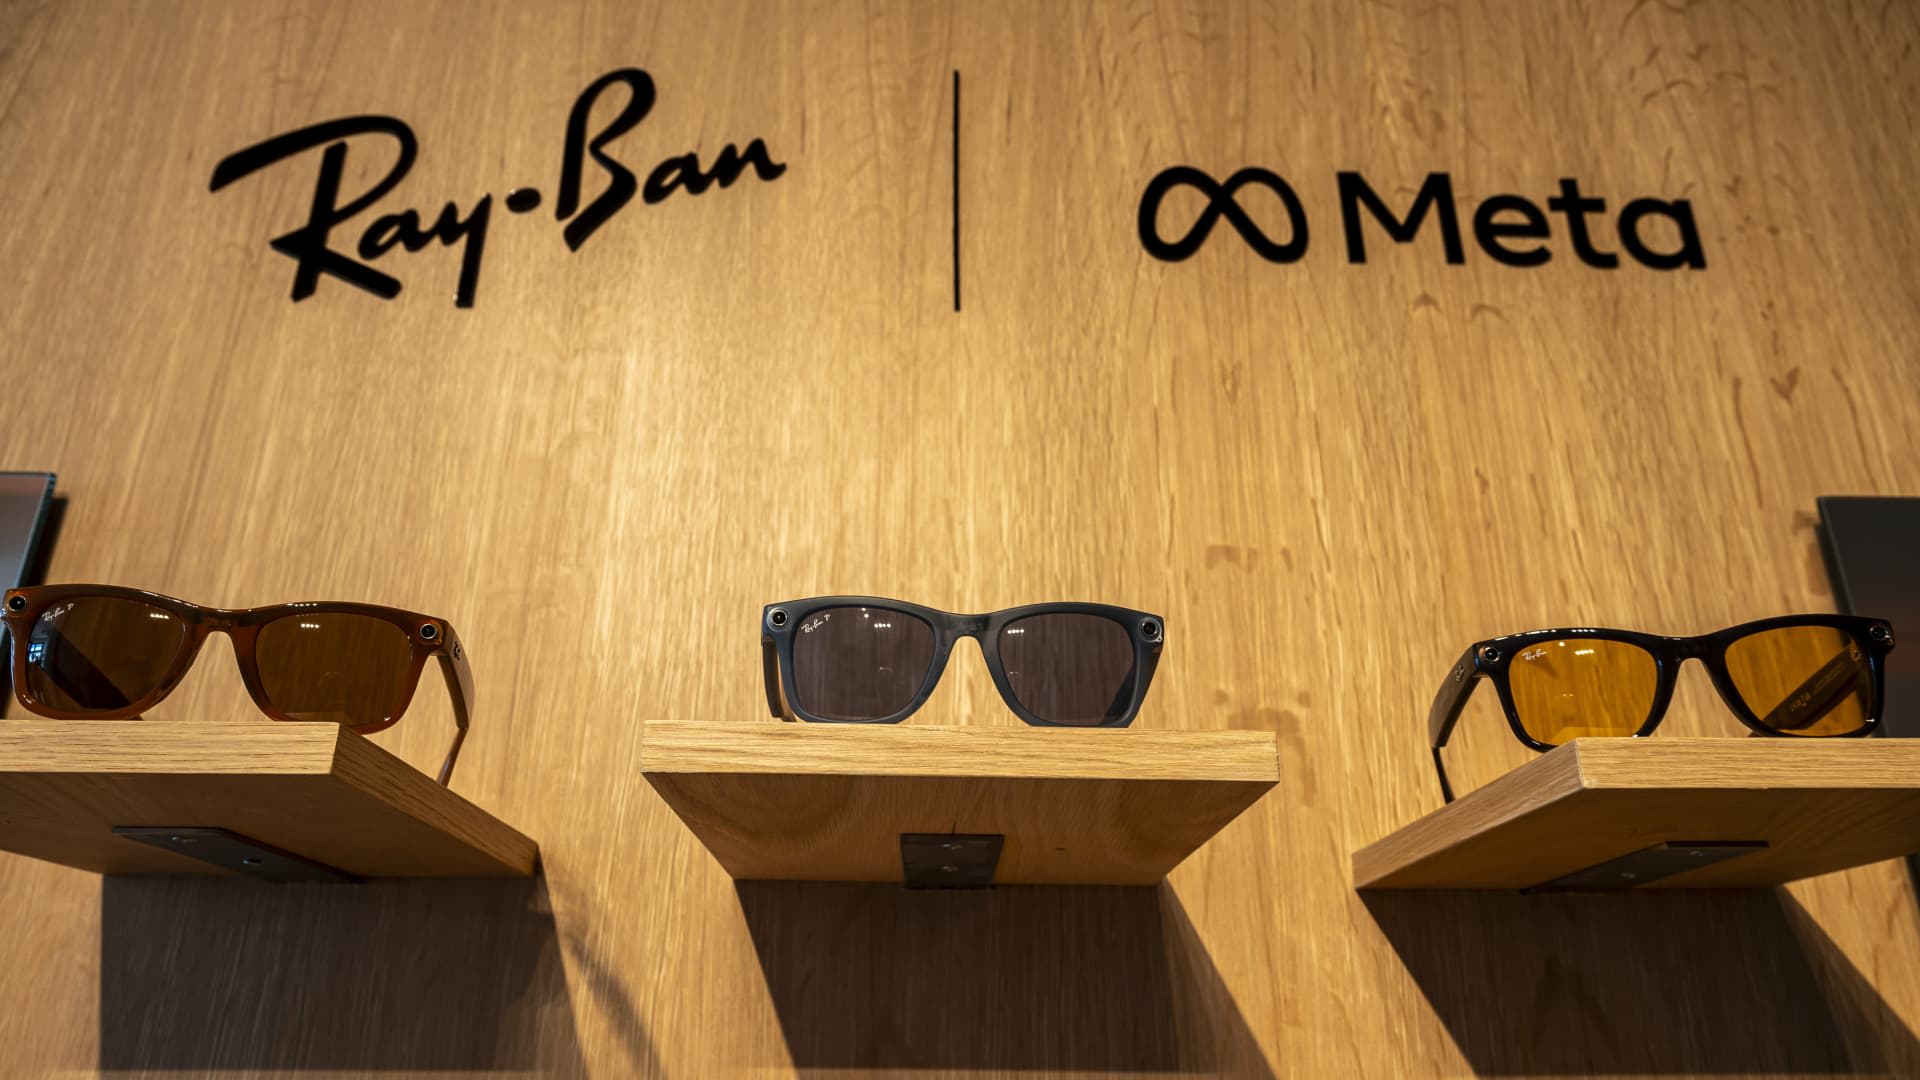 Meta eyes a small stake in Ray-Ban maker. Why Jim Cramer says it's a big deal